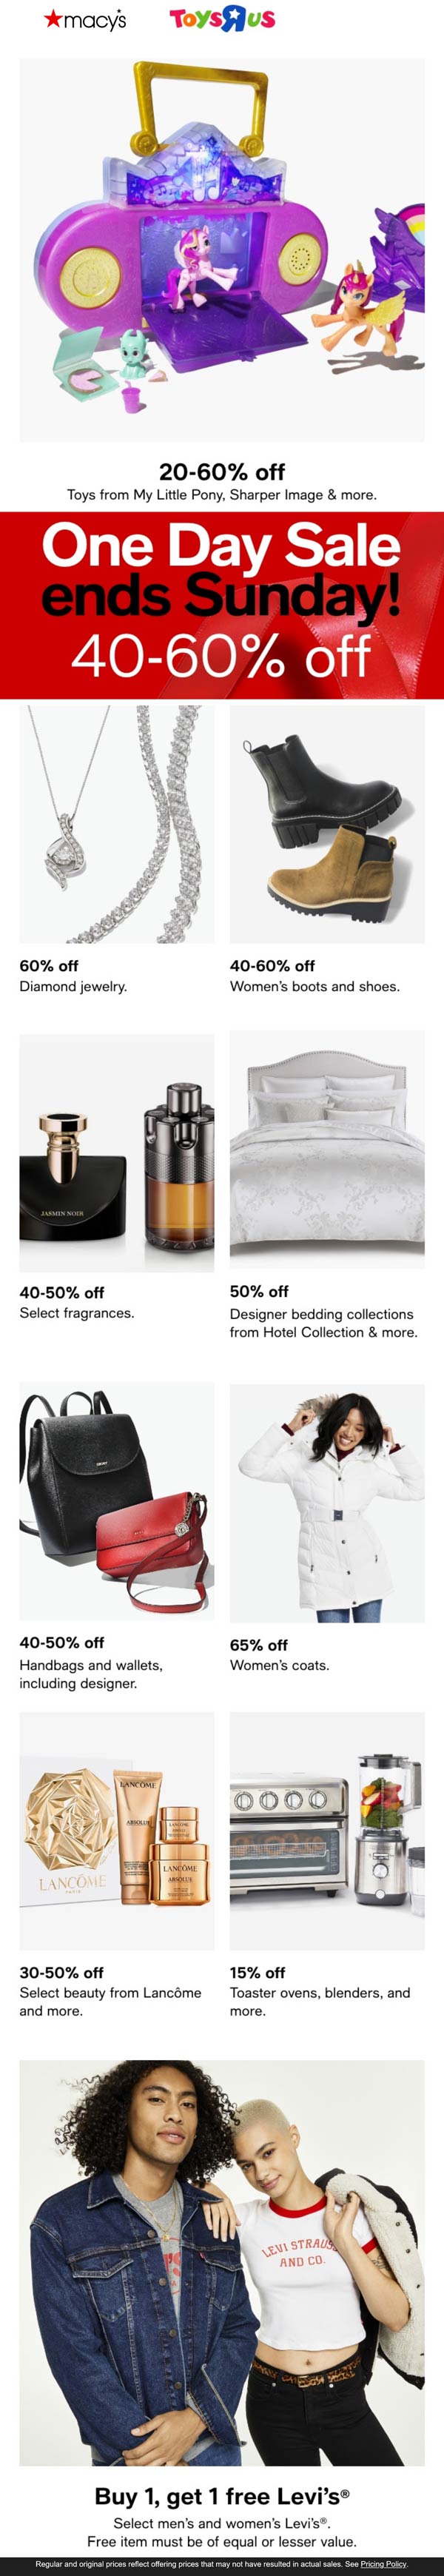 Macys coupons & promo code for [February 2023]